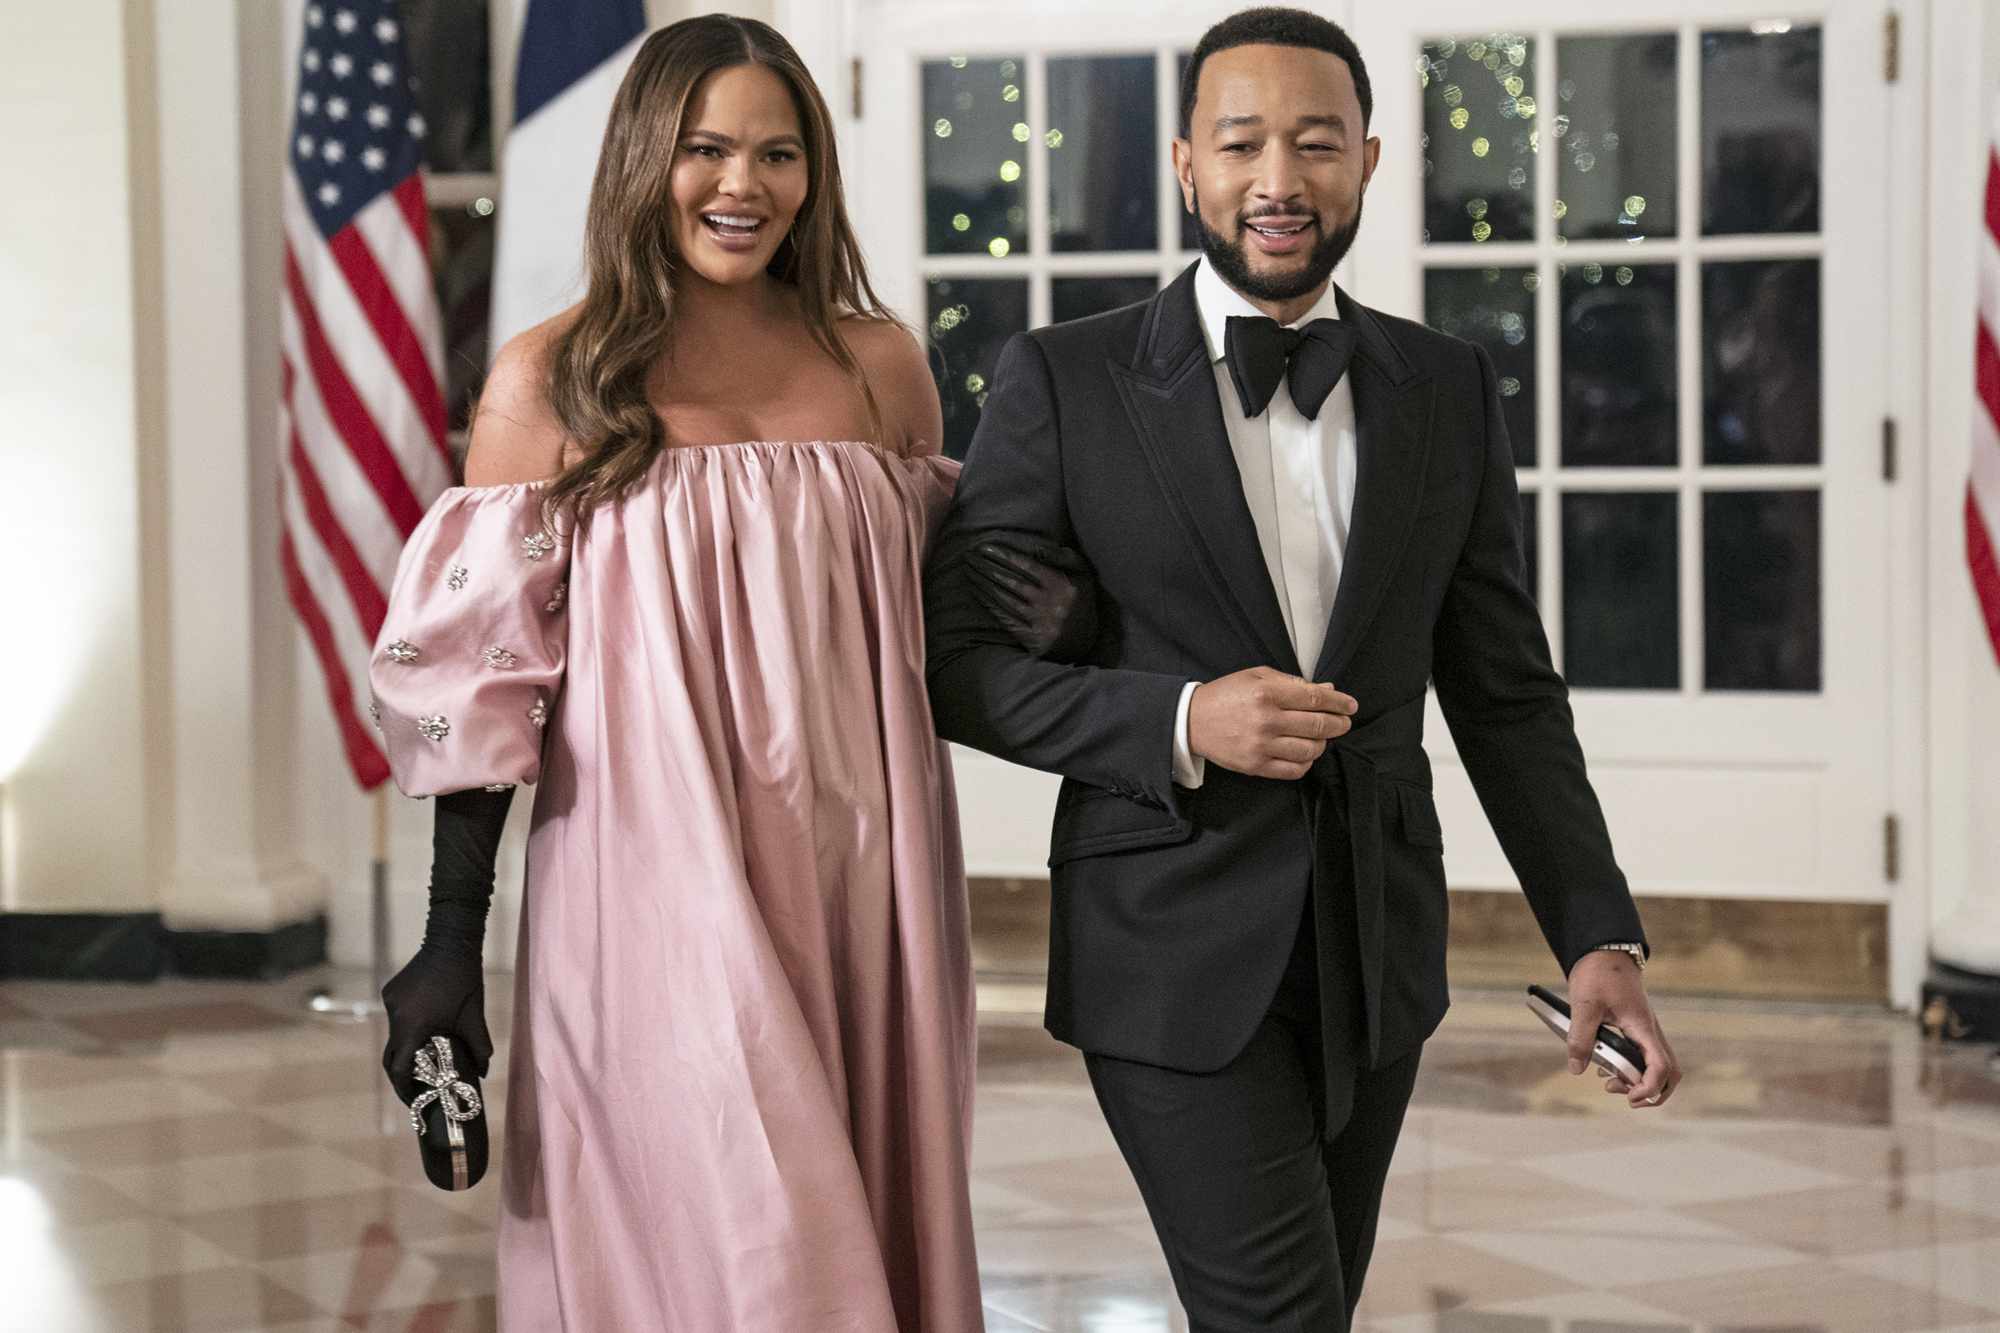 US singer John Legend and US model Chrissy Teigen arrive to attend the State Dinner in honor of French President Emmanuel Macron and wife Brigitte Macron hosted by US President Joe Biden and first lady Dr. Jill Biden at the White House, in Washington, DC, USA, 01 December 2022. This will be the first state dinner of President Biden's presidency and a chance for the US and France to strengthen ties that have frayed due to disputes over trade and national security. The Bidens host a State Visit by President Macron and Mrs. Marcon of France, Washington, USA - 01 Dec 2022